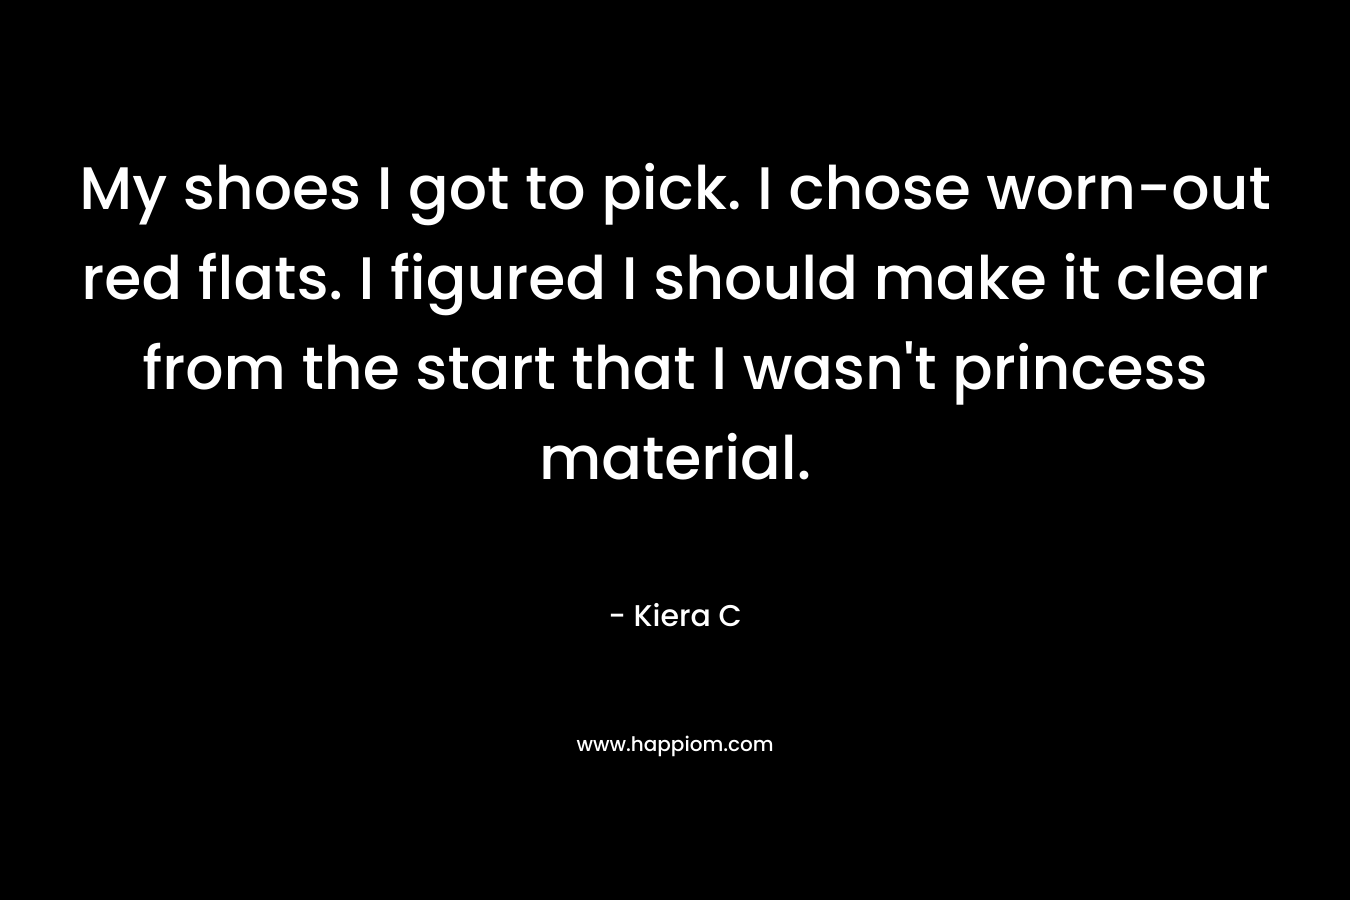 My shoes I got to pick. I chose worn-out red flats. I figured I should make it clear from the start that I wasn’t princess material. – Kiera C